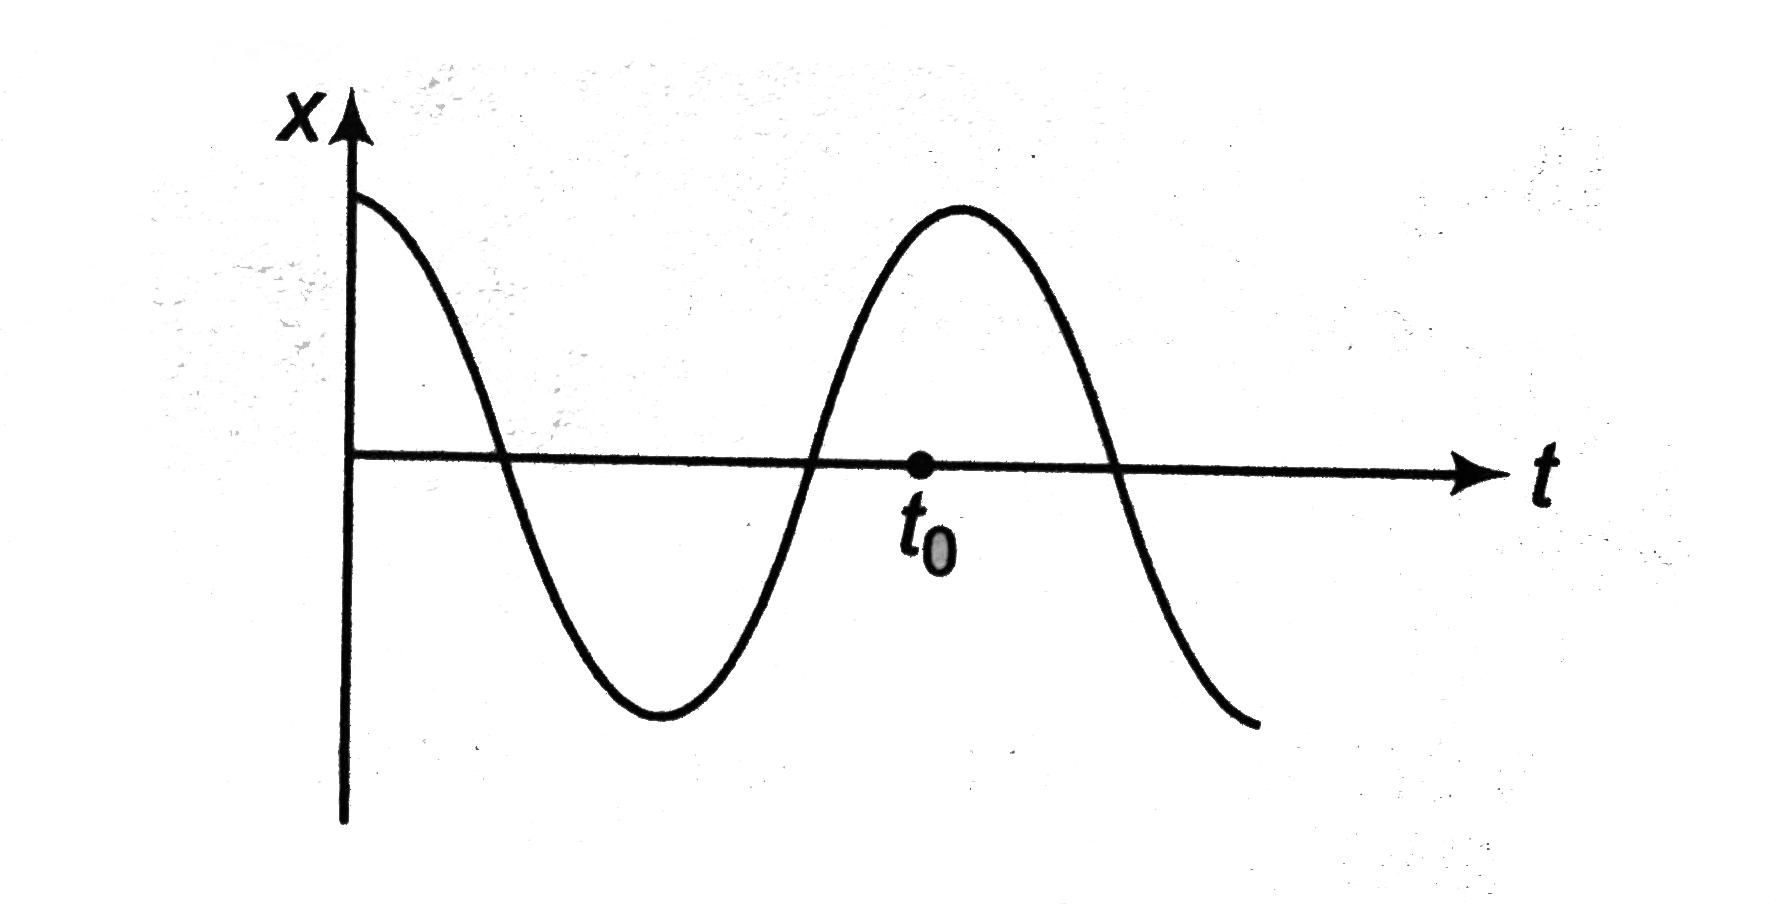 x - t graph of a particle in SHM is         At time t = t(0), what are the signs of v and a of the particle?